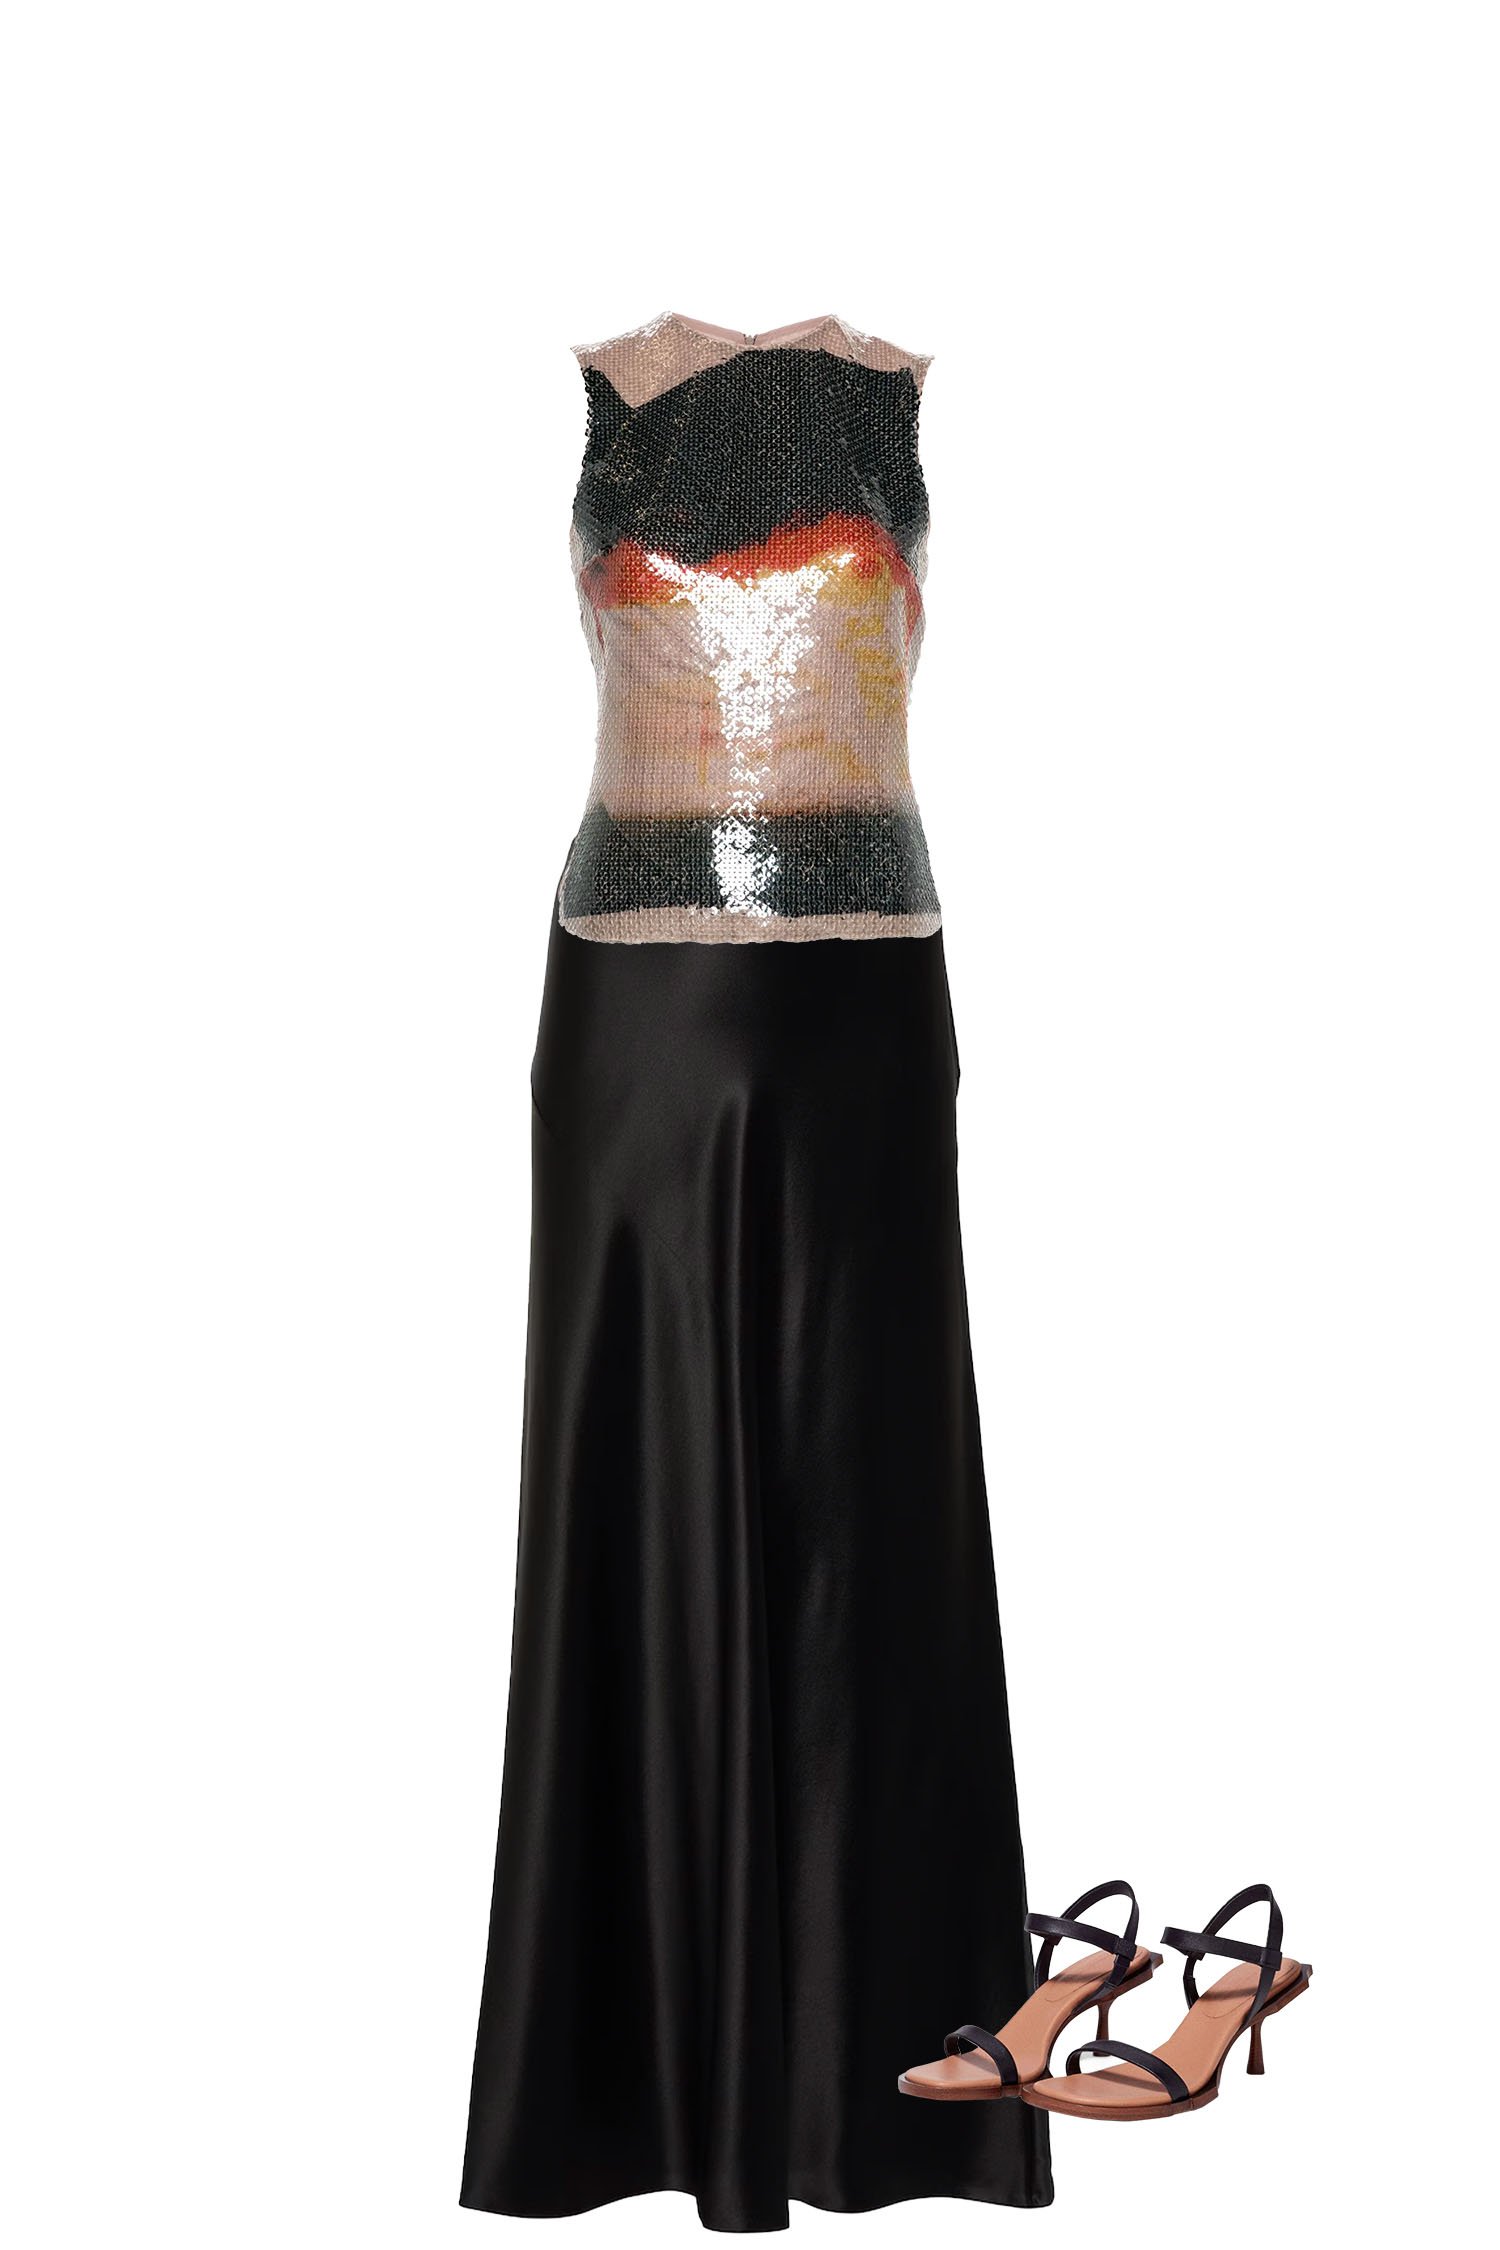 Black Satin Maxi Skirt Outfit with Taupe and Black Sleeveless Sequin Top, and Black Heeled Sandals